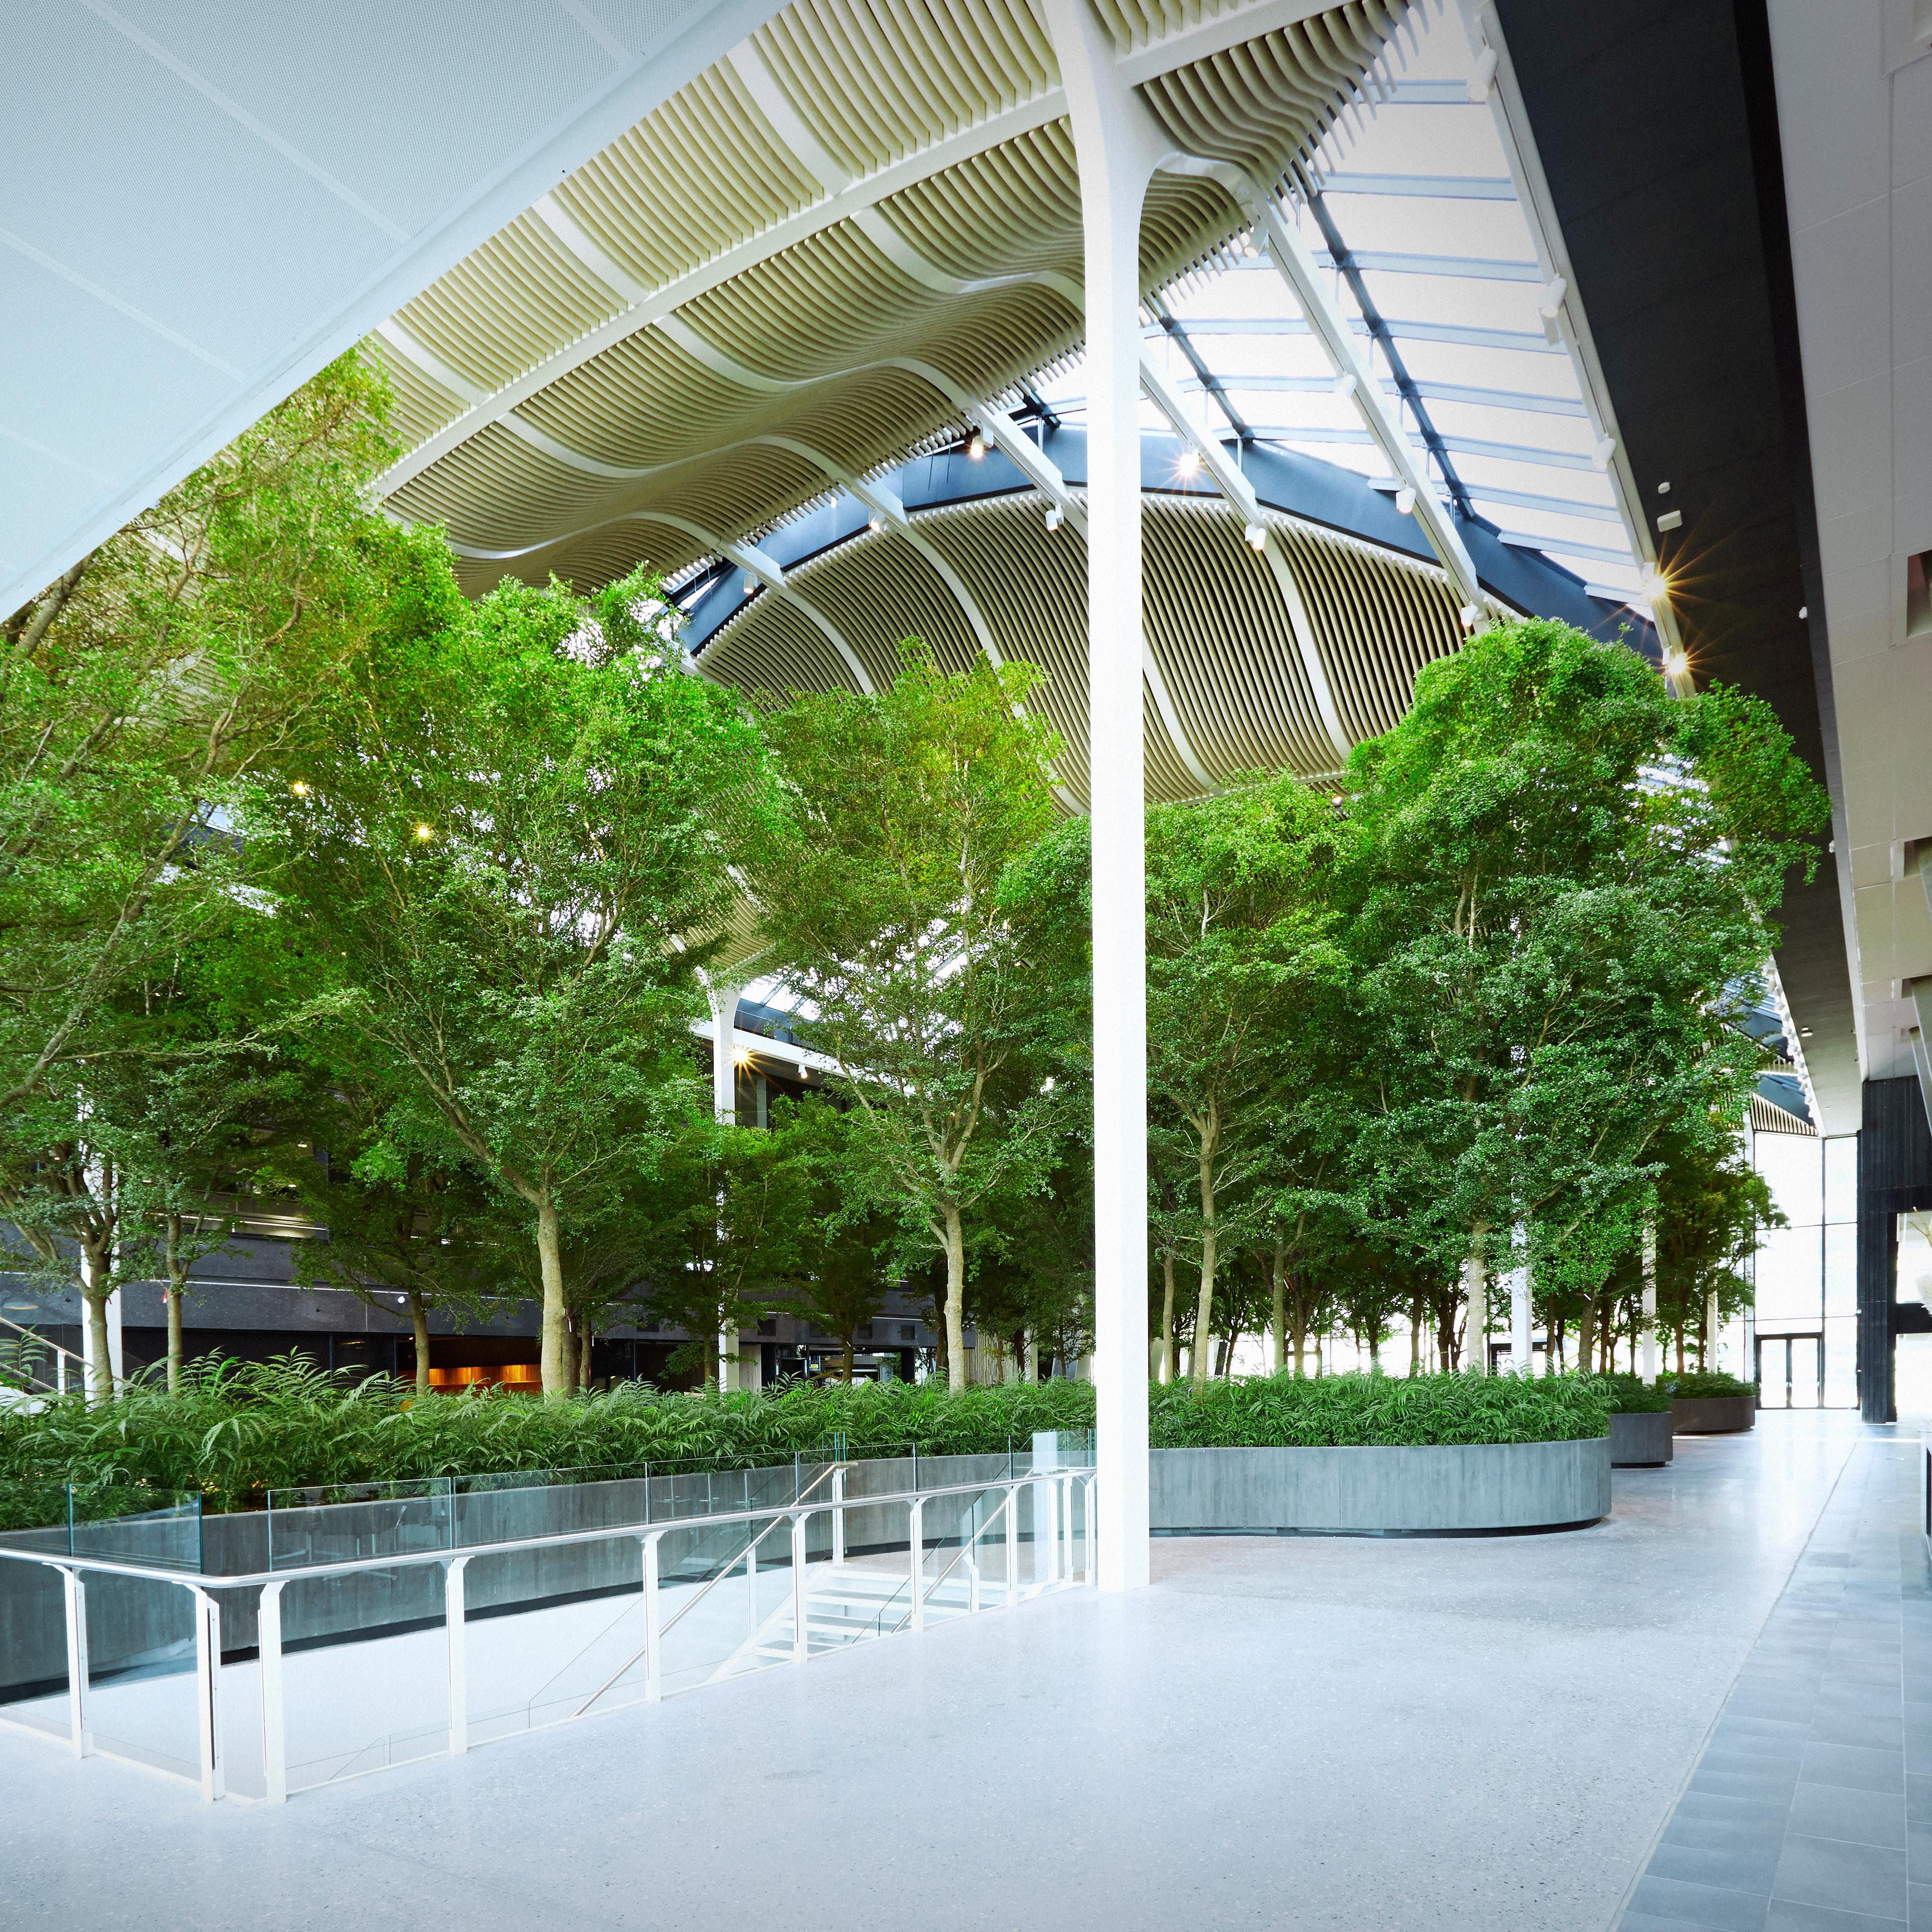 Our Atrium is 1,400 sqm with 60 trees and 4500 plants